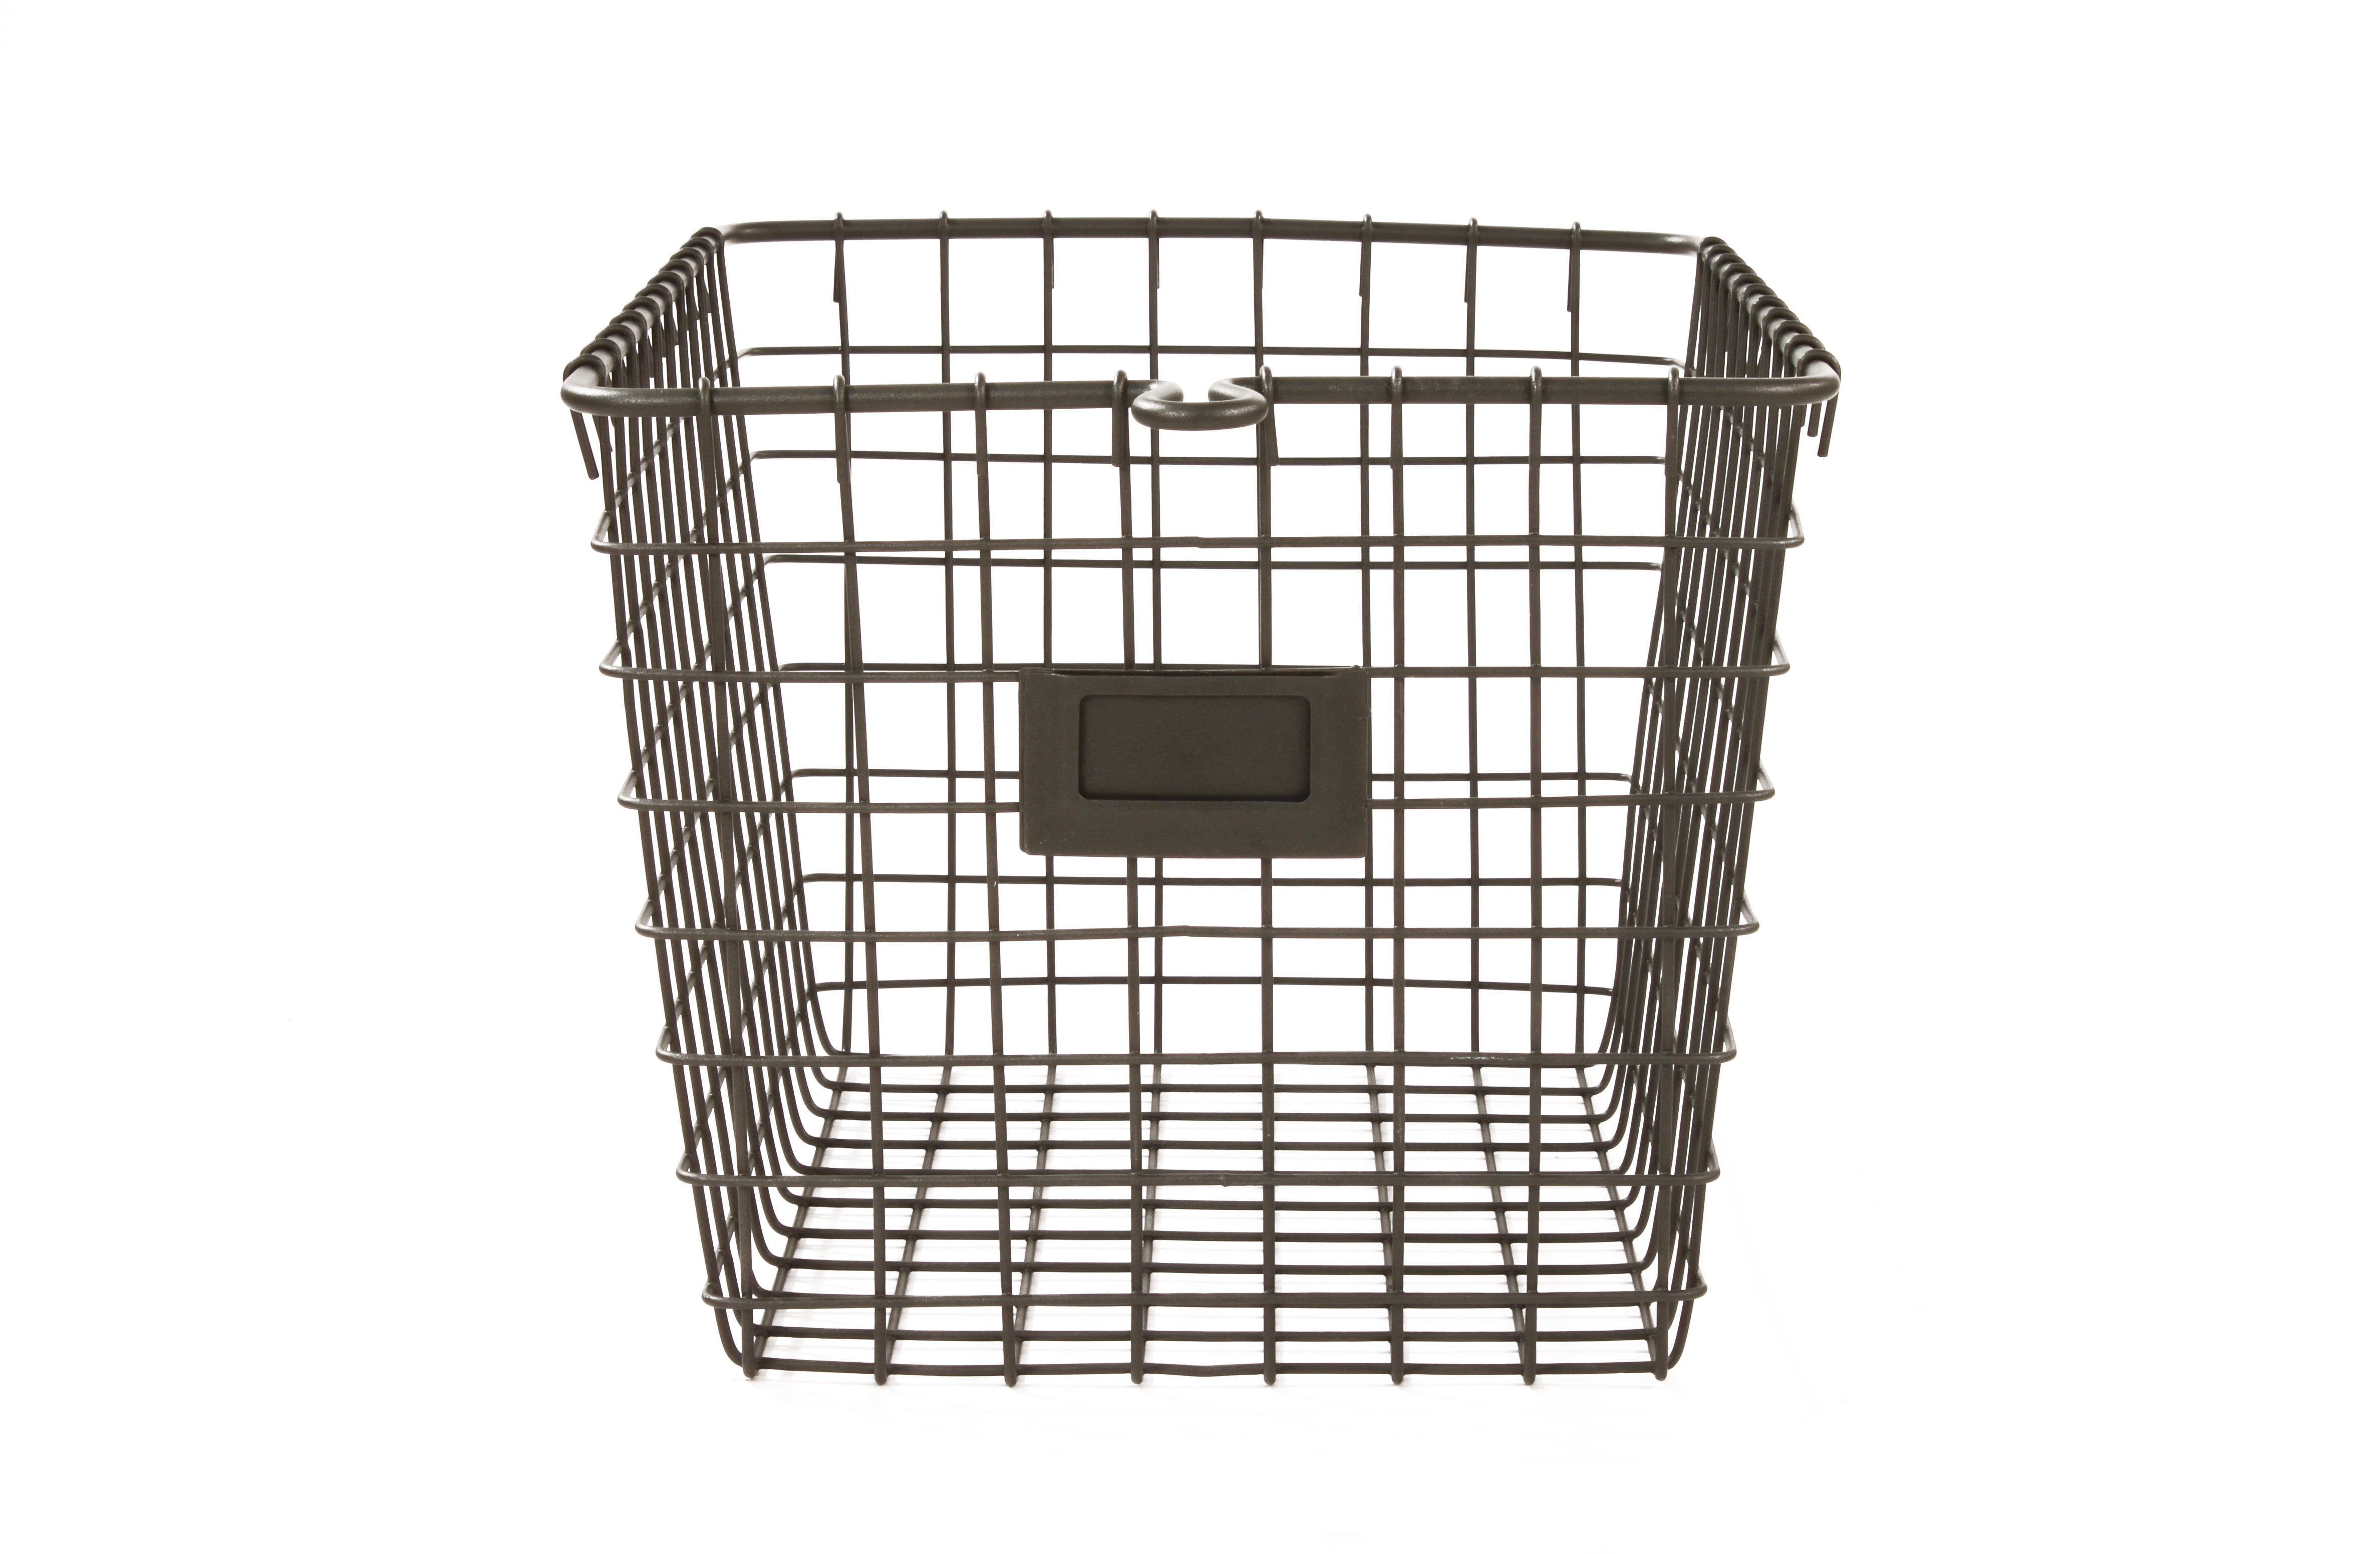 Wire Storage Baskets for Organizing with Lables, Pantry